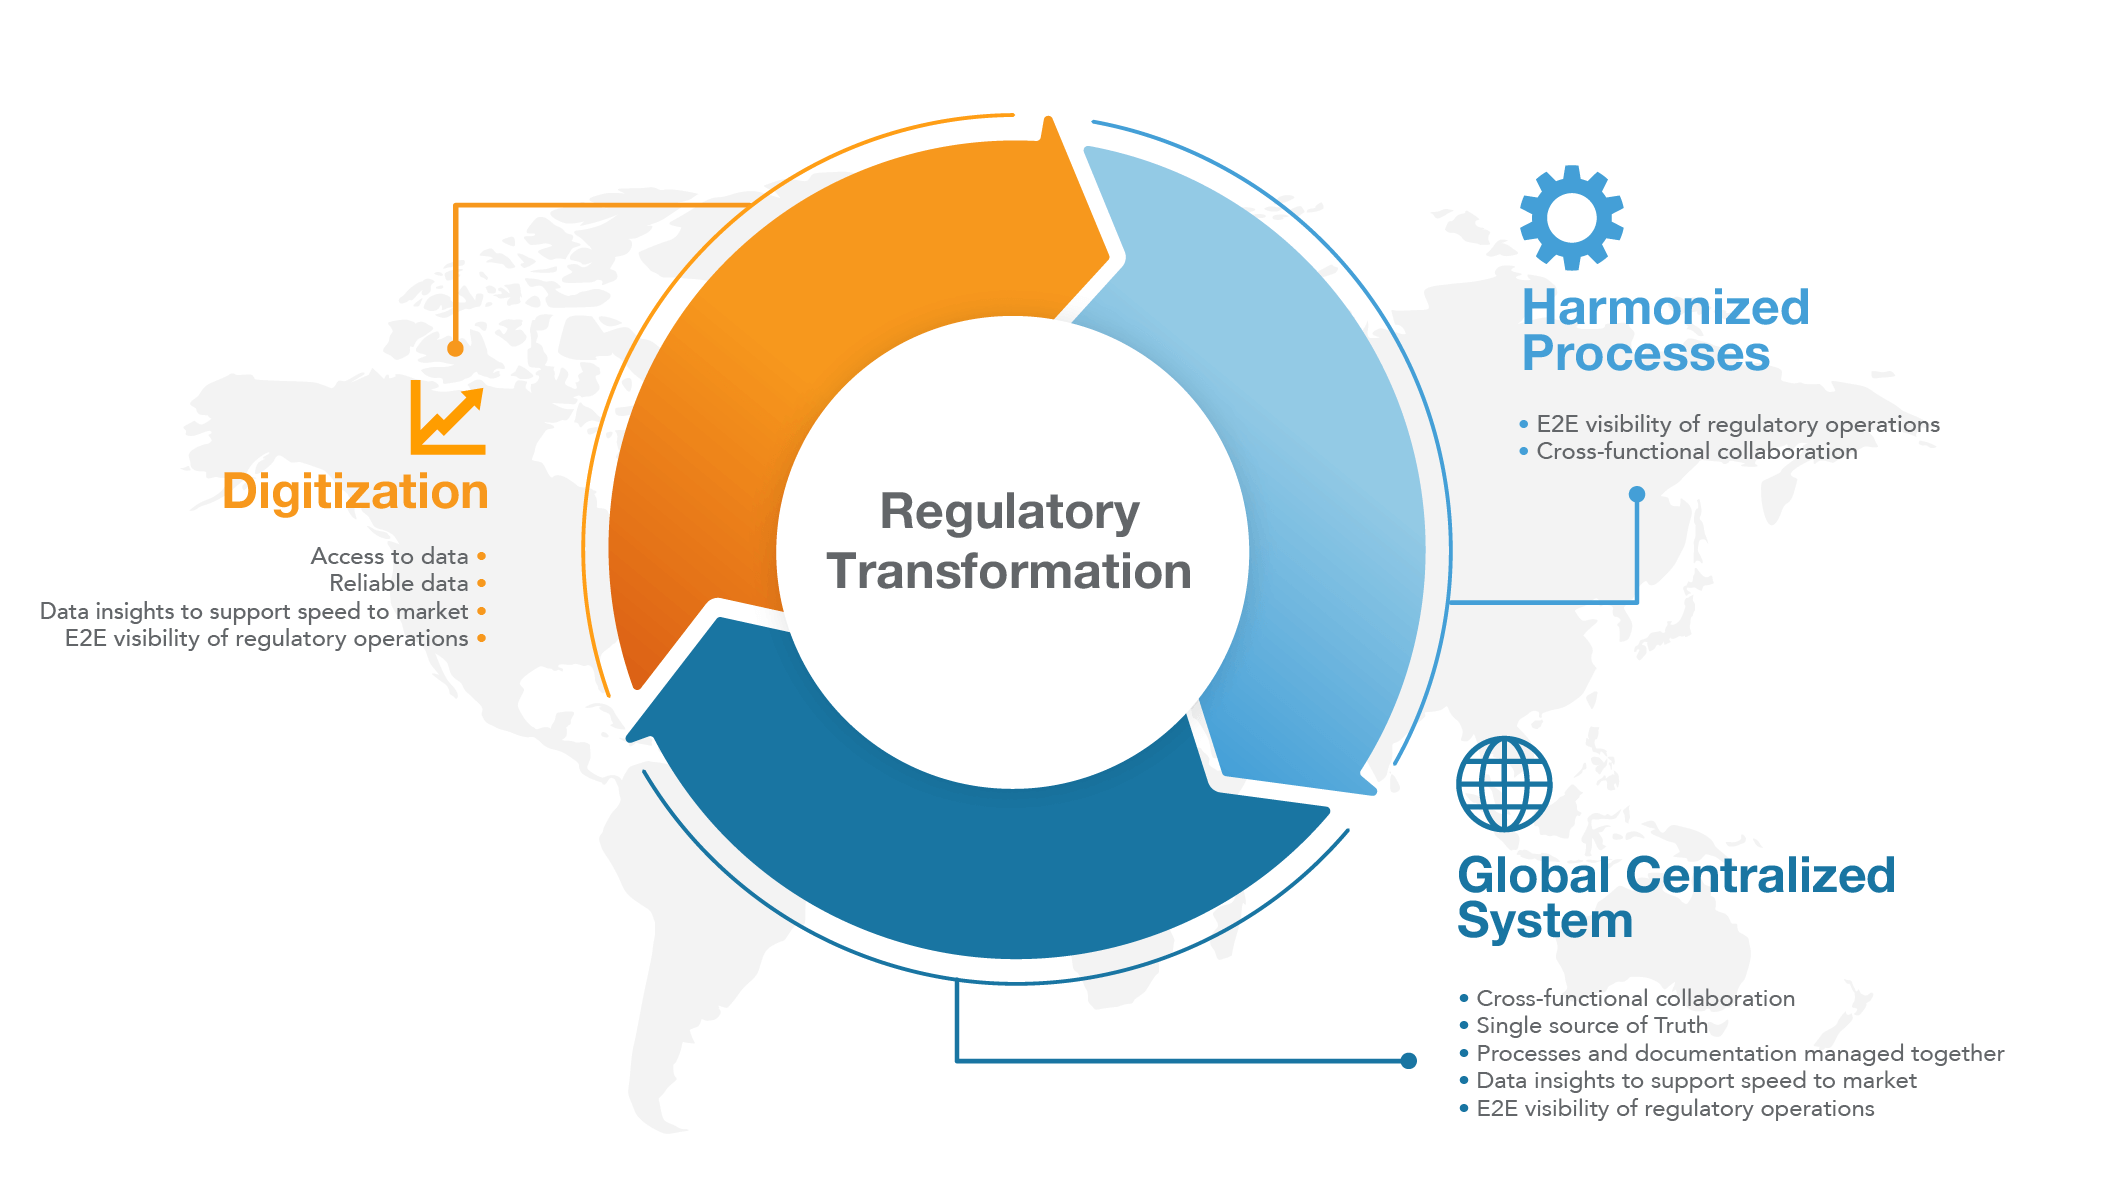 Image by Veeva MedTech illustrating the vision of regulatory transformation, where digitization, harmonized processes and global centralized system enable cross-functional collaboration in medical device and diagnostic companies